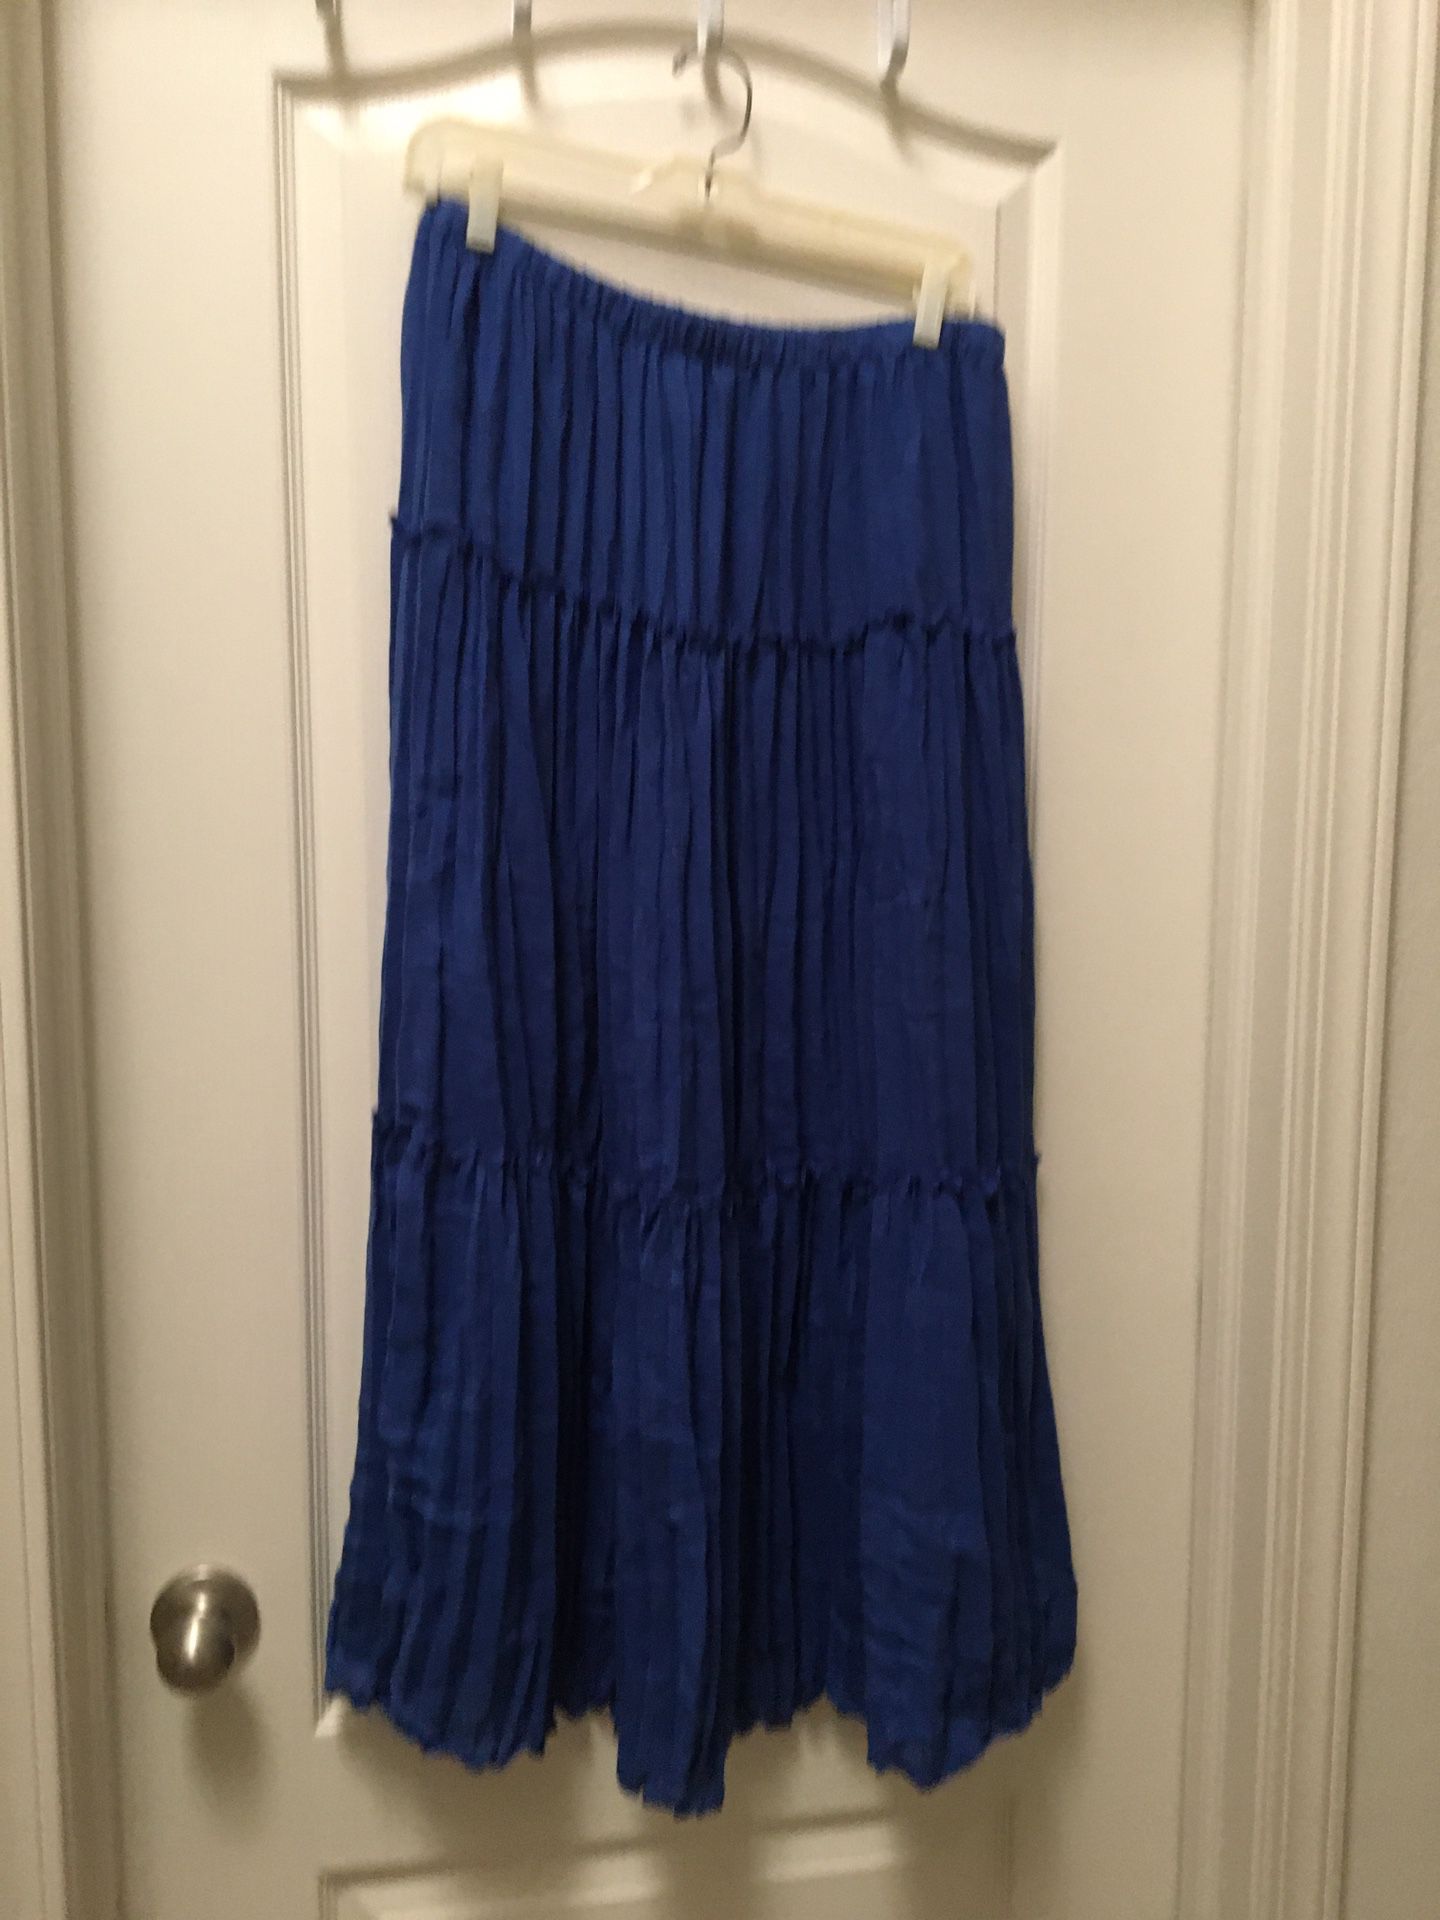 Dress with navy blue, medium size, long 36 inches.55% rayon,45 % polyester